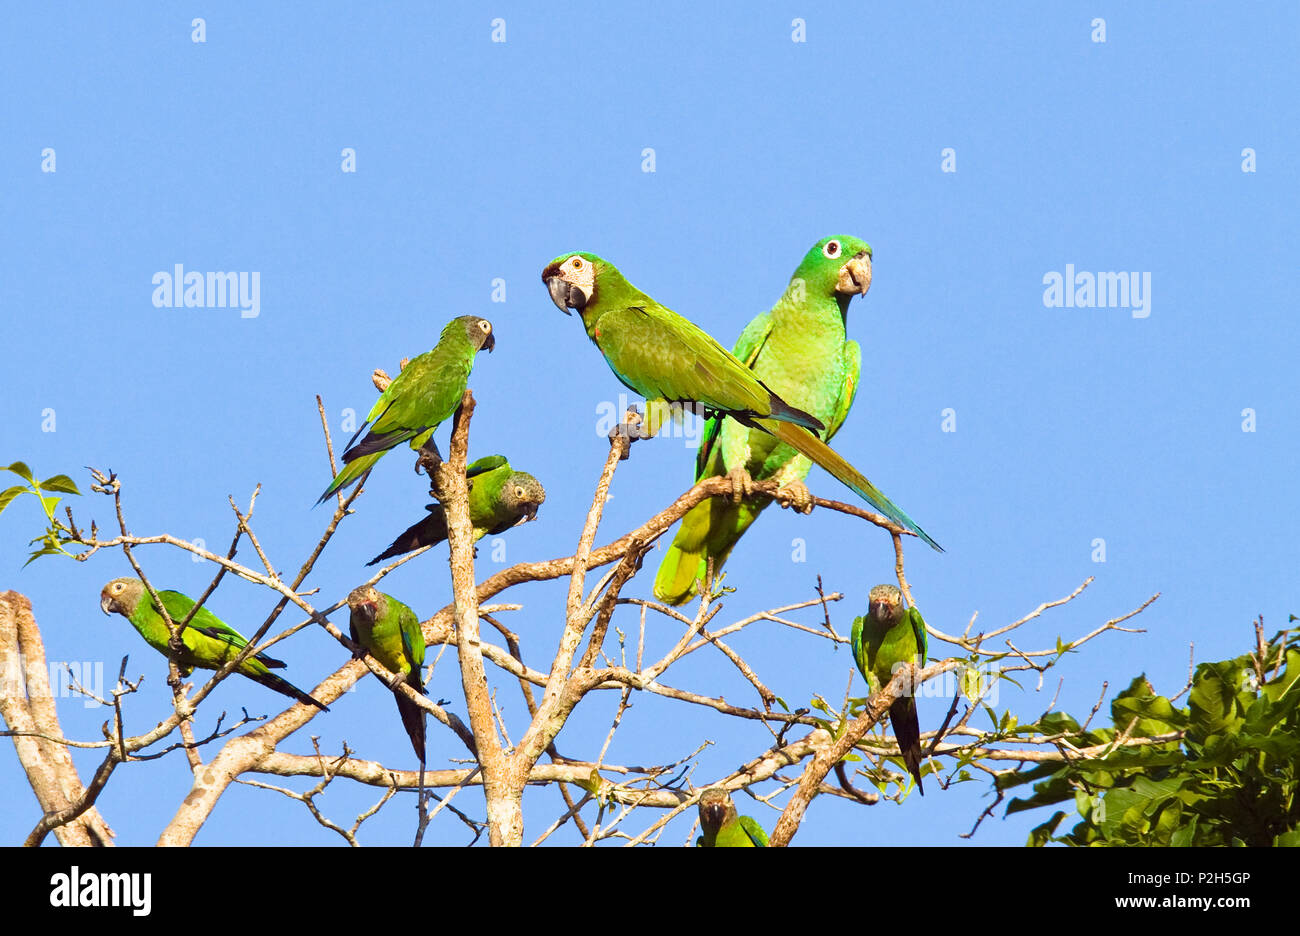 Chestnut-fronted Macaw, Mealy Amazon and Dusky-headed Parakeets, Tambopata Reservat, Peru, South America Stock Photo